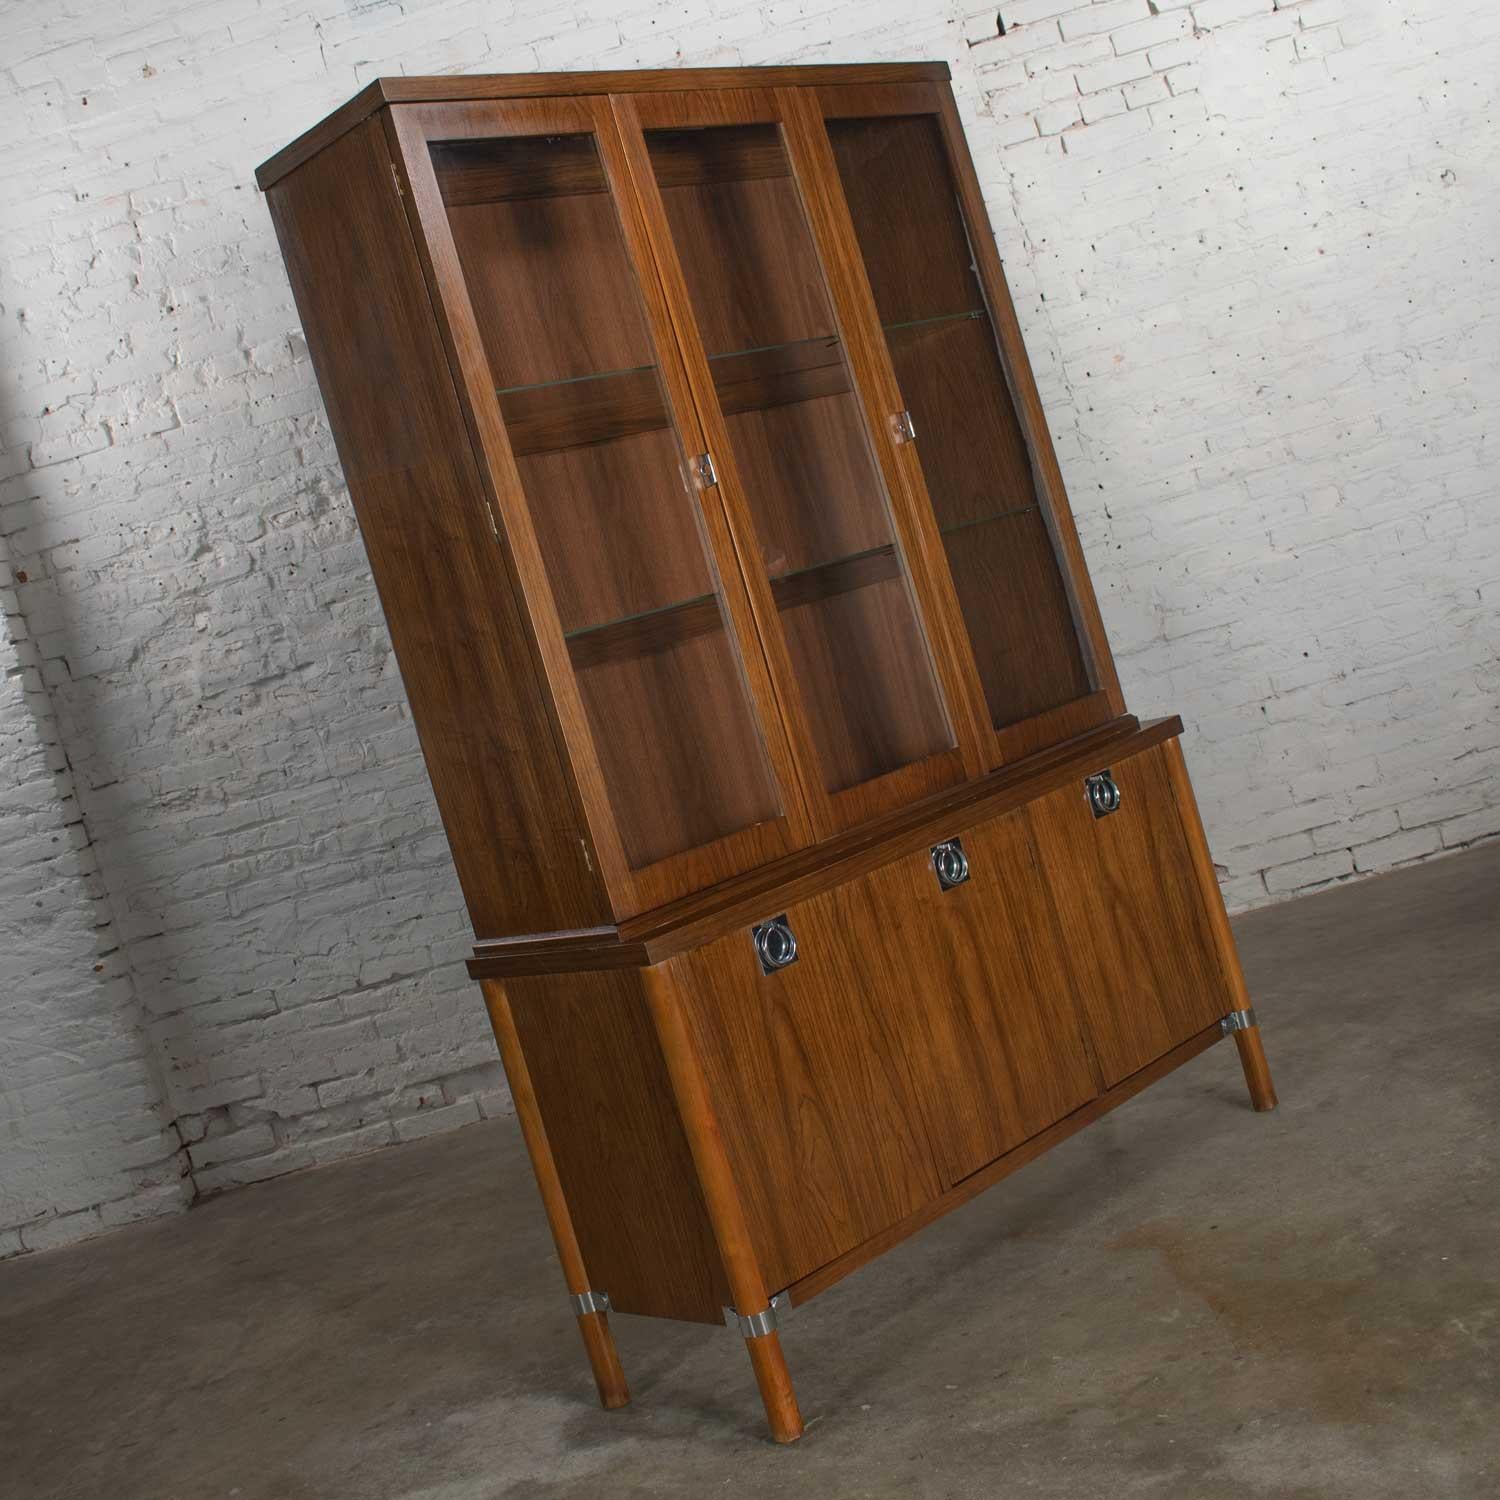 Unknown Mid-Century Modern Walnut Lighted China Cabinet with Chrome Accents